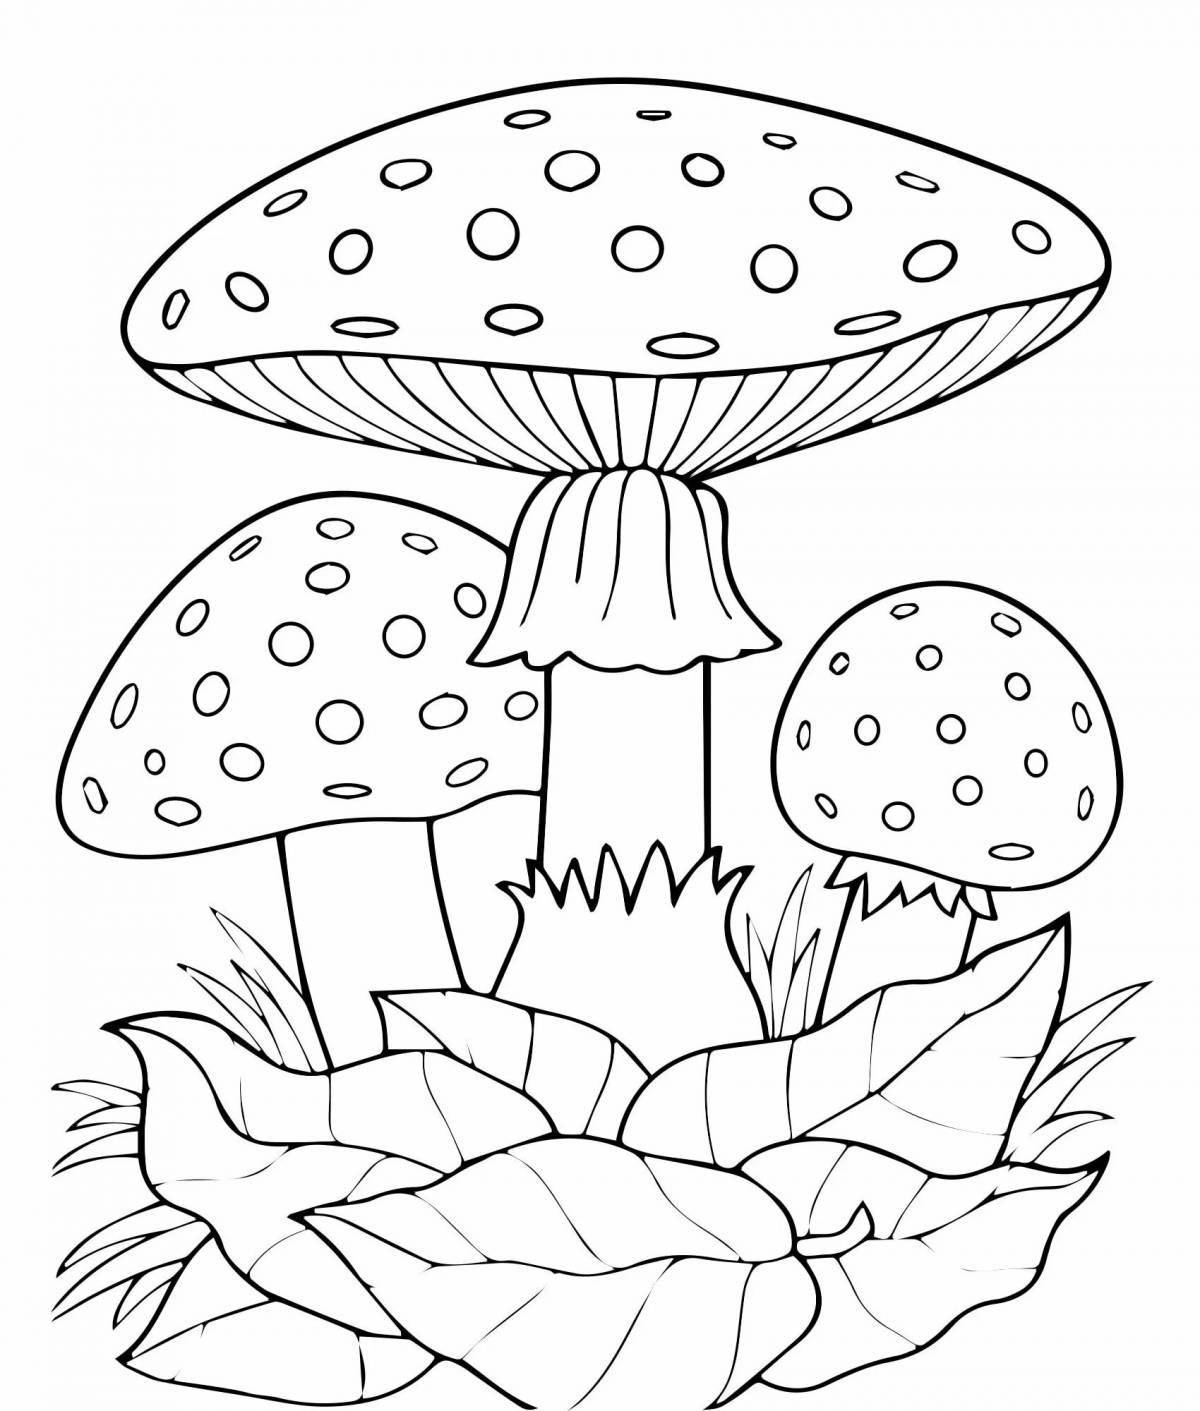 Great autumn coloring book for 3-4 year olds